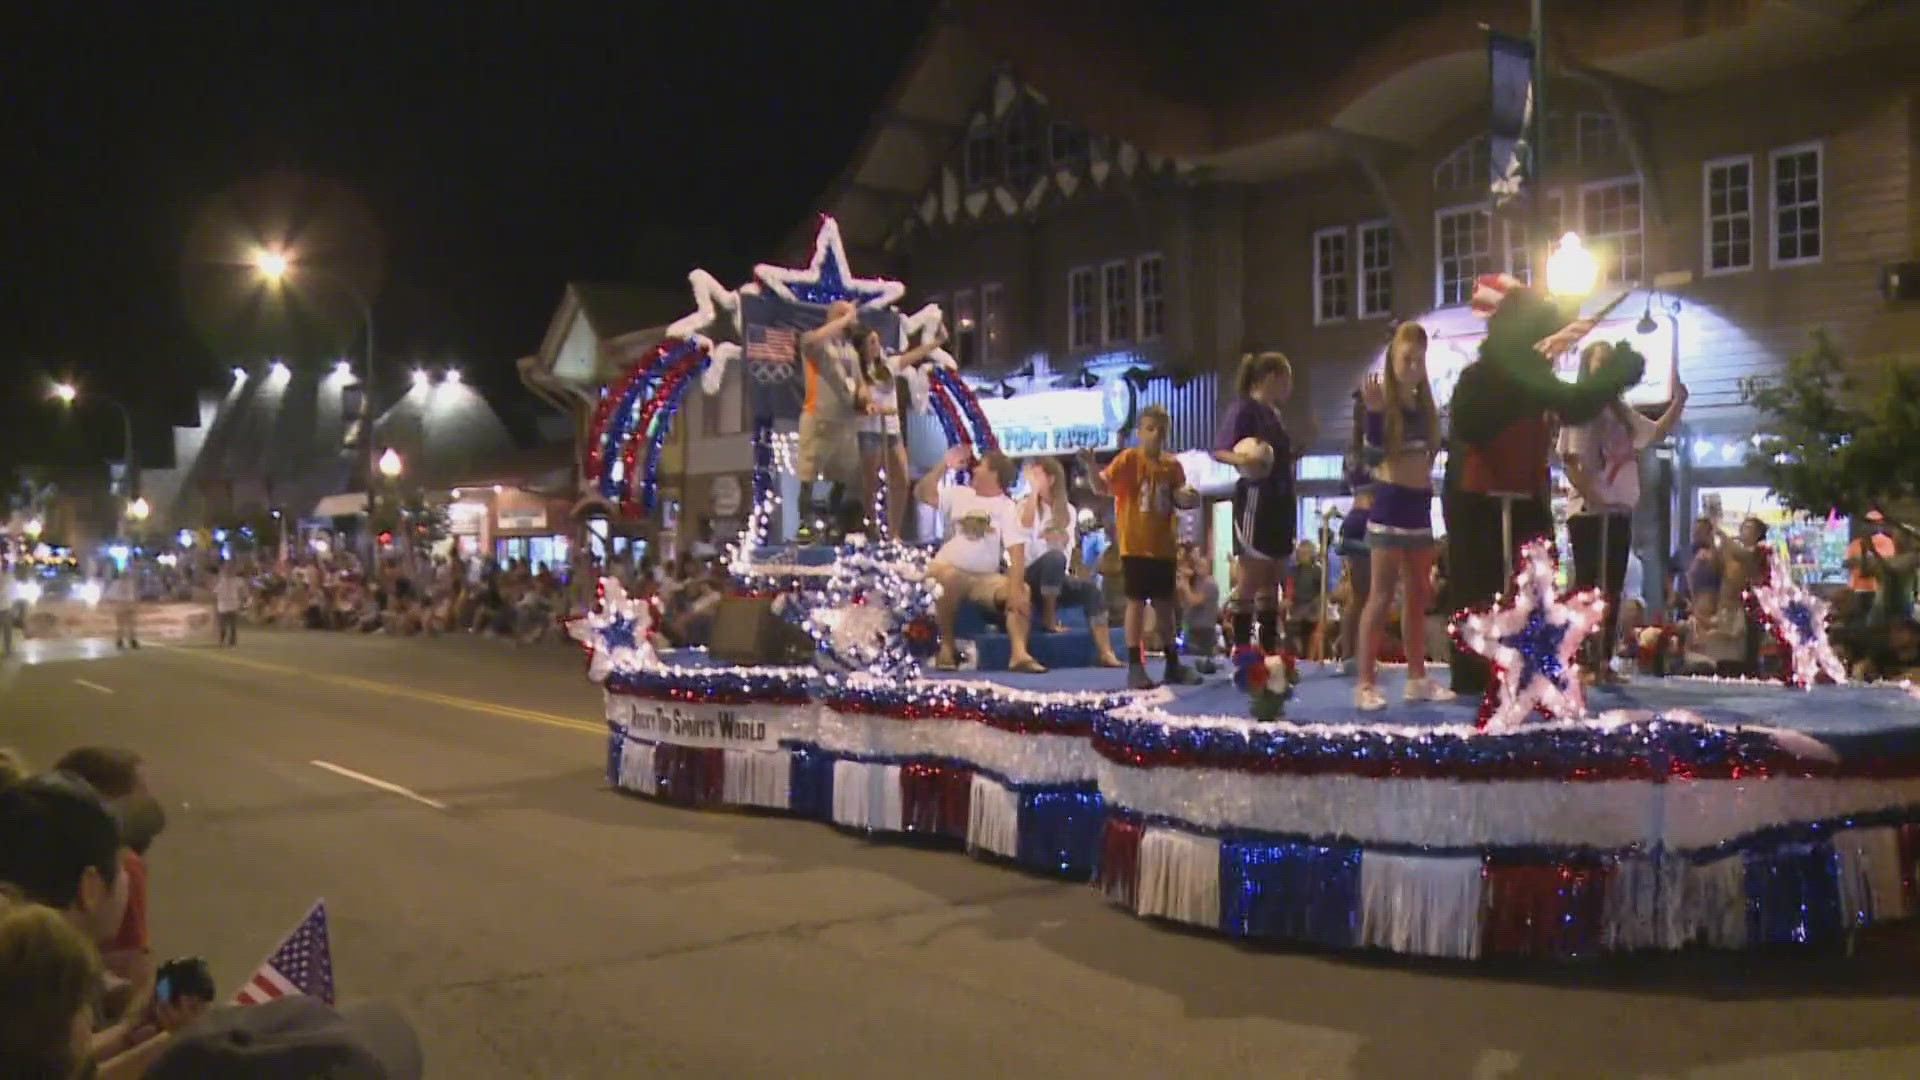 The Fourth of July Parade will start at 12:01 a.m. Organizers call it "the first Independence Day celebration in the nation."